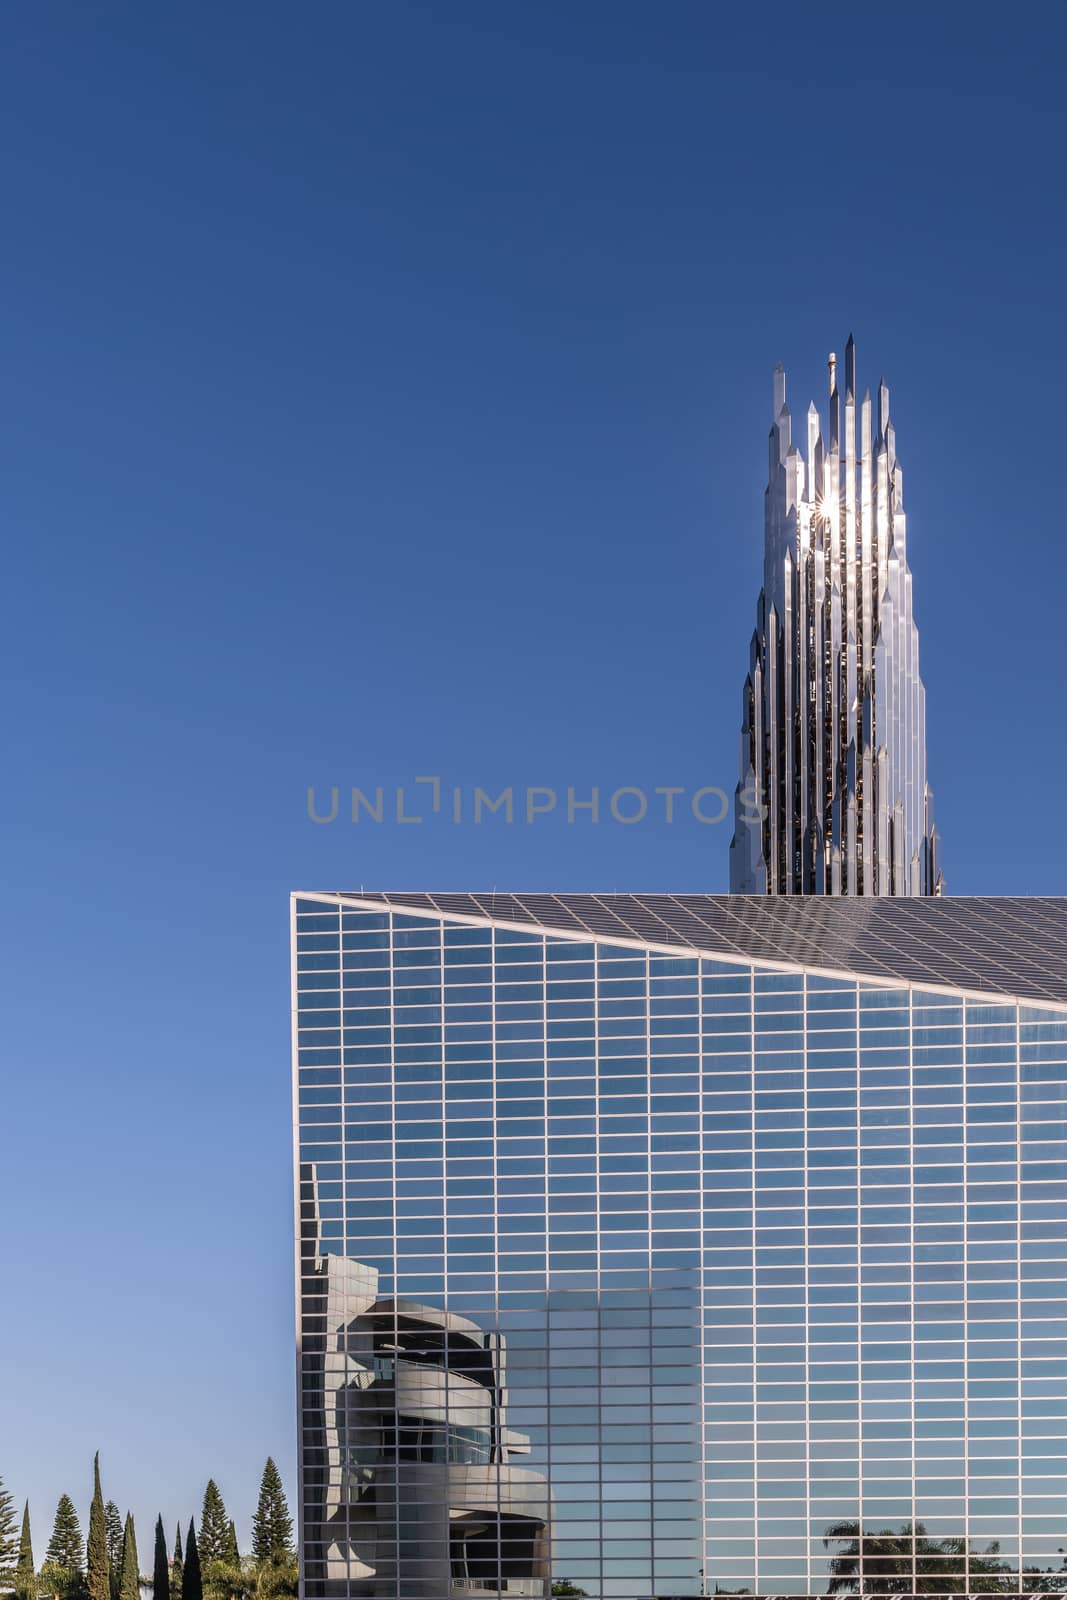 Garden Grove, California, USA - December 13, 2018: Crystal Christ Cathedral. Closeup of Church building and Crean Tower against blue sky. Cultural Center reflected in wall.